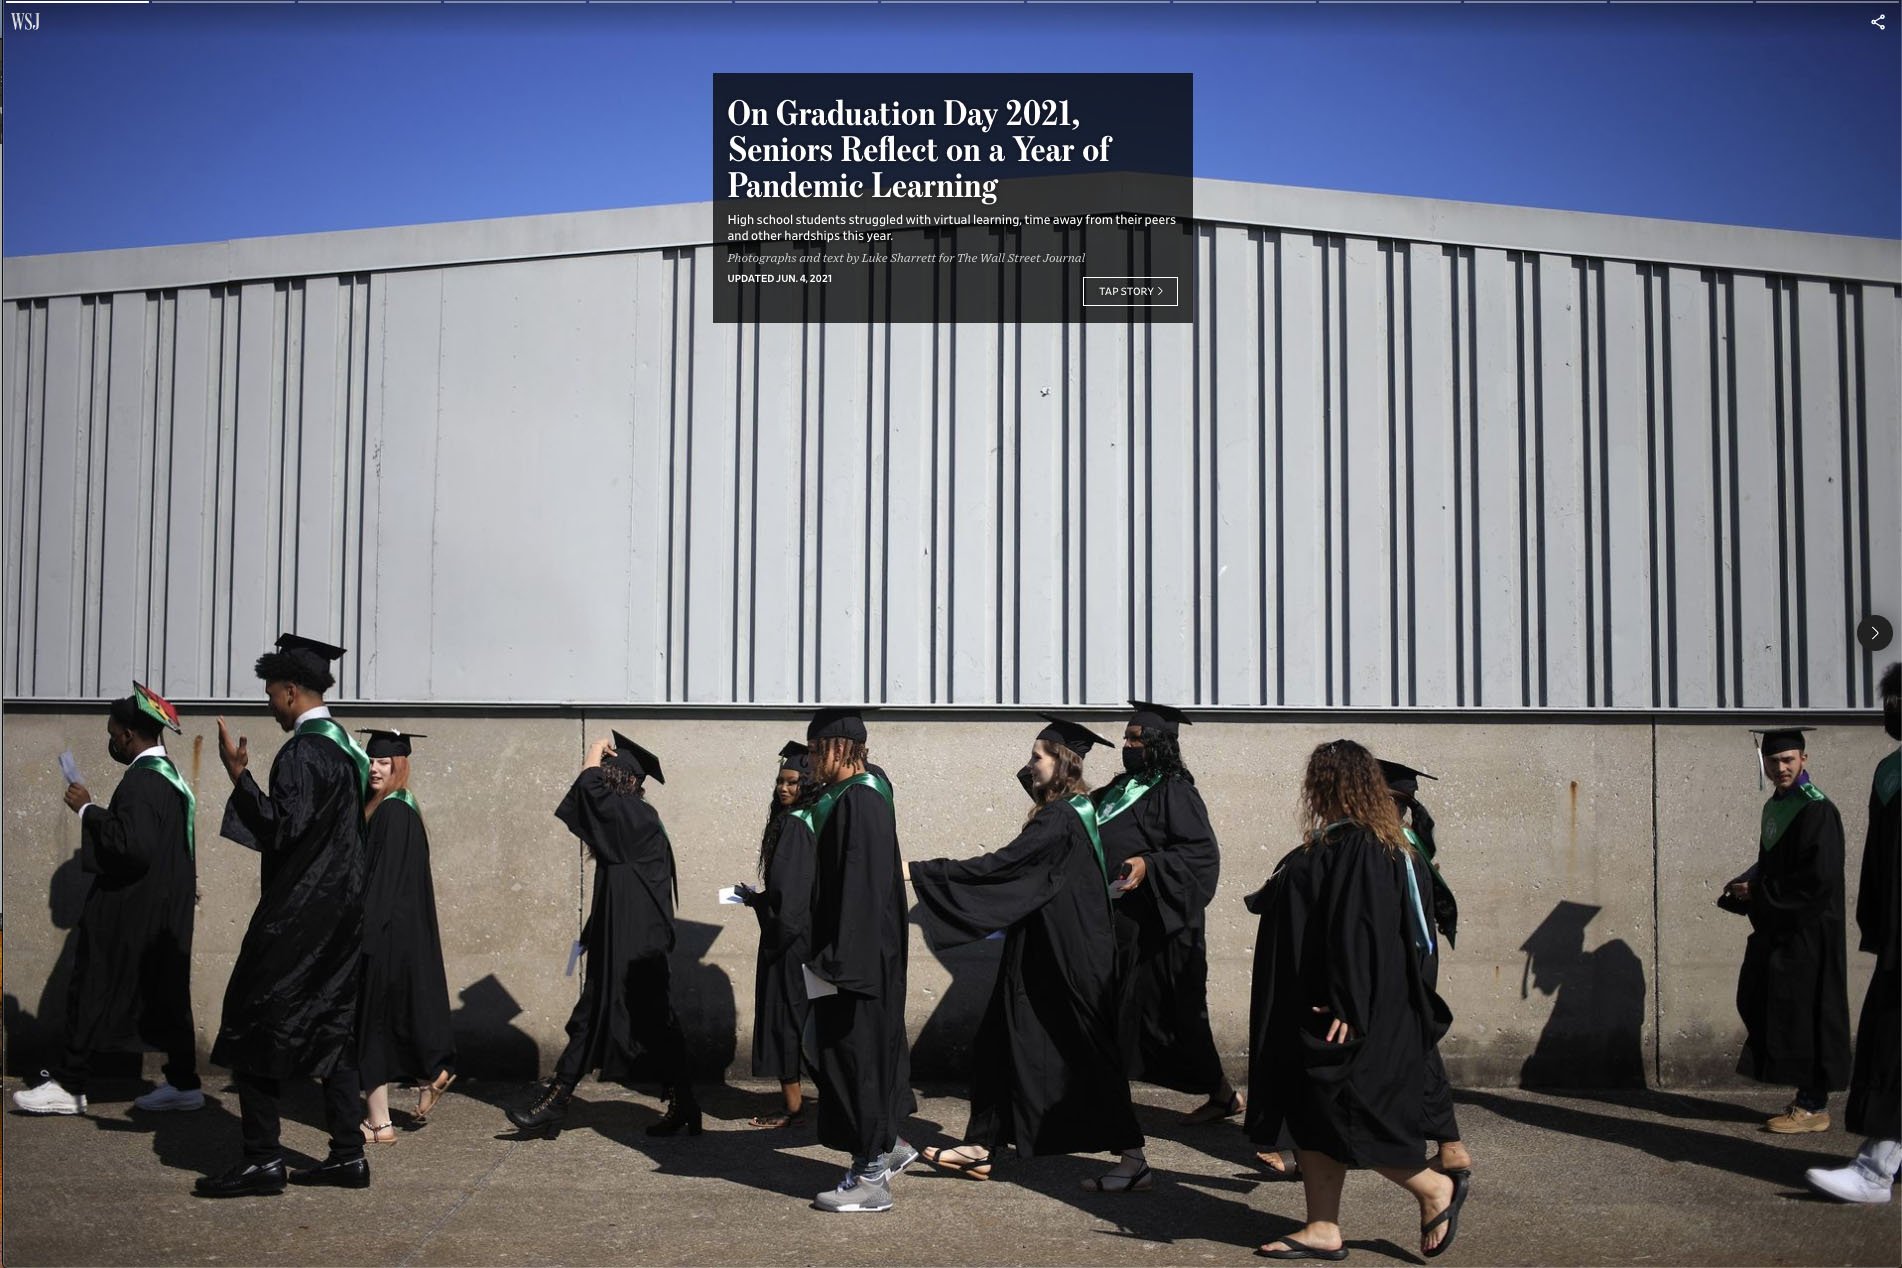   Photography:   Luke Sharrett    Photo Editing and Production : Stephen Reiss   Story:   On Graduation Day 2021, Seniors Reflect on a Year of Pandemic Learnning    